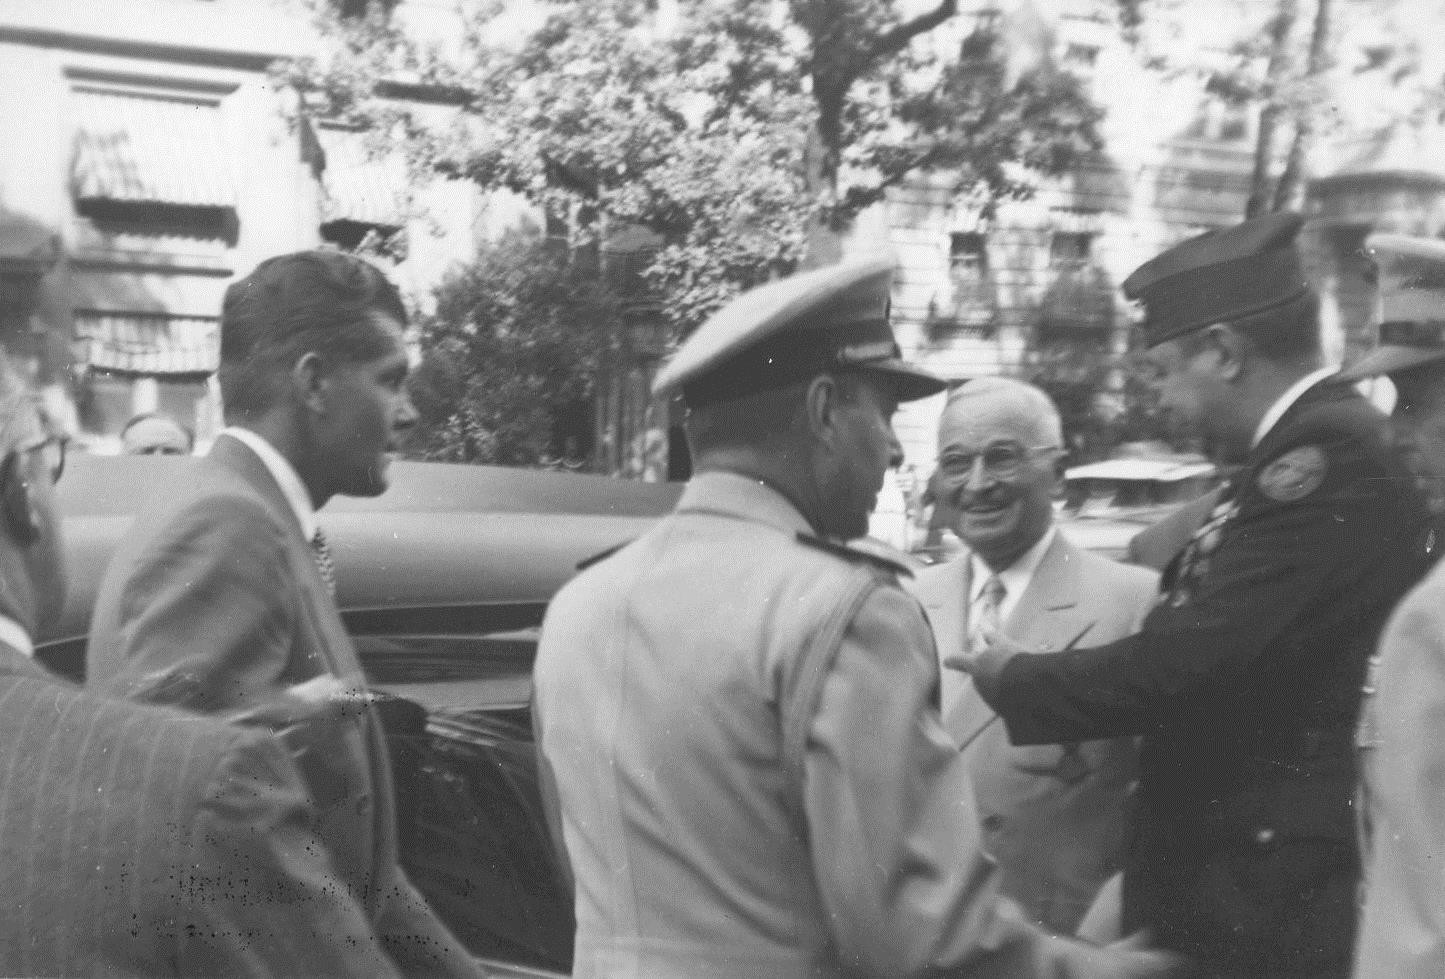 US President Harry Truman arriving at Marine Corps League Convention to apologize for calling USMC 'the Navy's police force and propagandists', Washington, DC, United States, 7 Sep 1950, photo 2 of 2